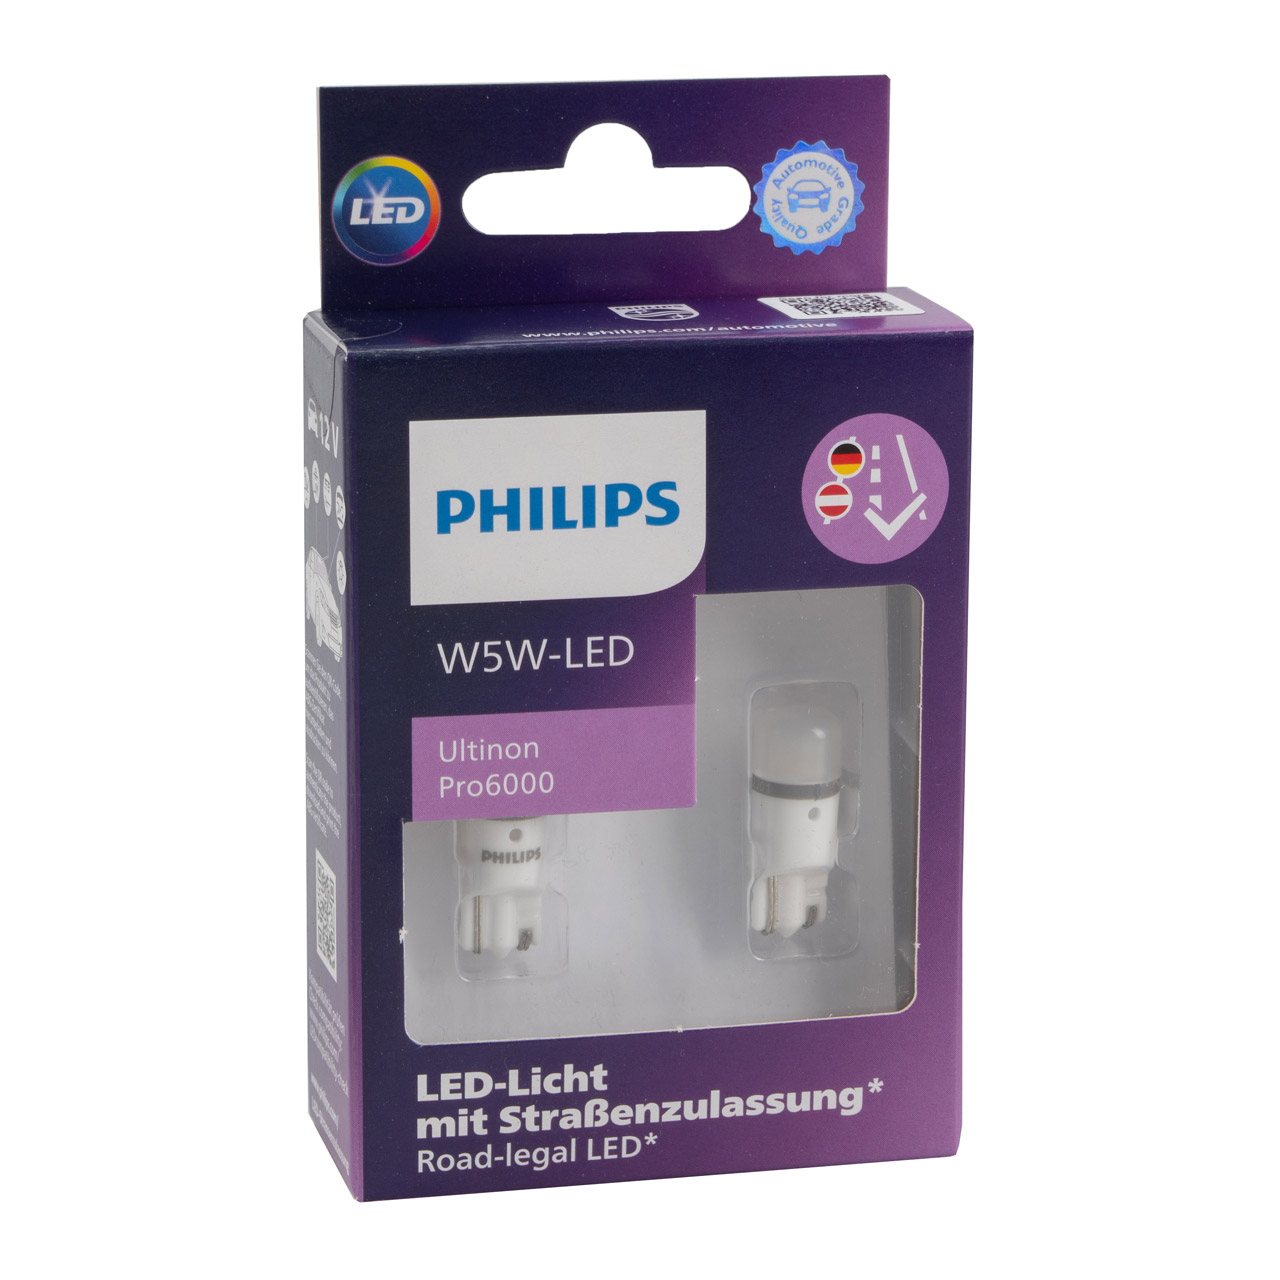 2x PHILIPS Ultinon Pro6000 H7 LED + Adapter für MERCEDES W176 VW GOLF 7  POLO 5